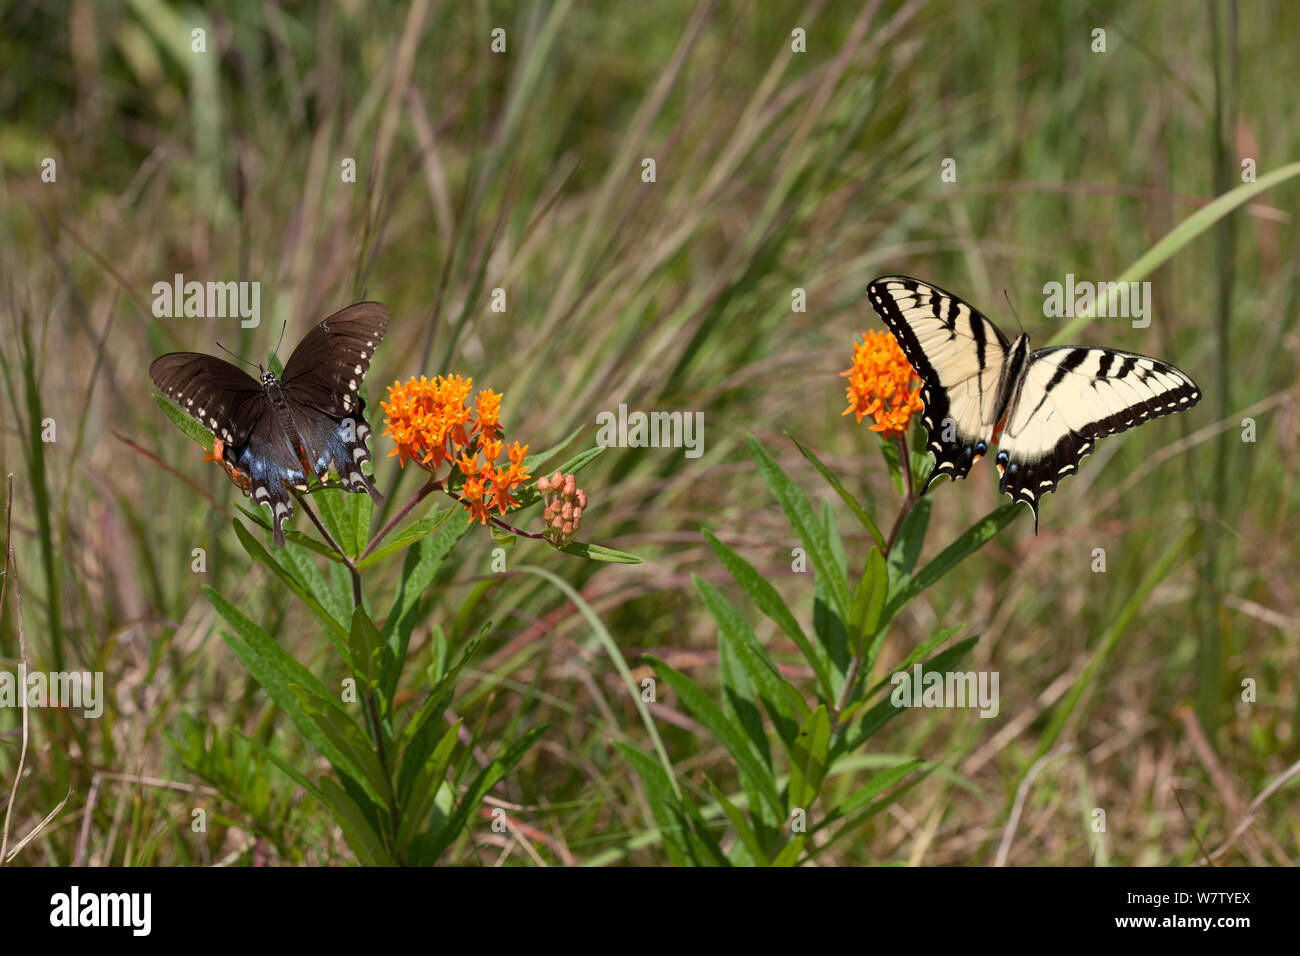 Eastern tiger swallowtail (Papilio glaucus) and Spicebush Swallowtail (Papilio troilus) on butterfly weed, French Creek State Park, Berks County, Pennsylvania, USA, August. Stock Photo